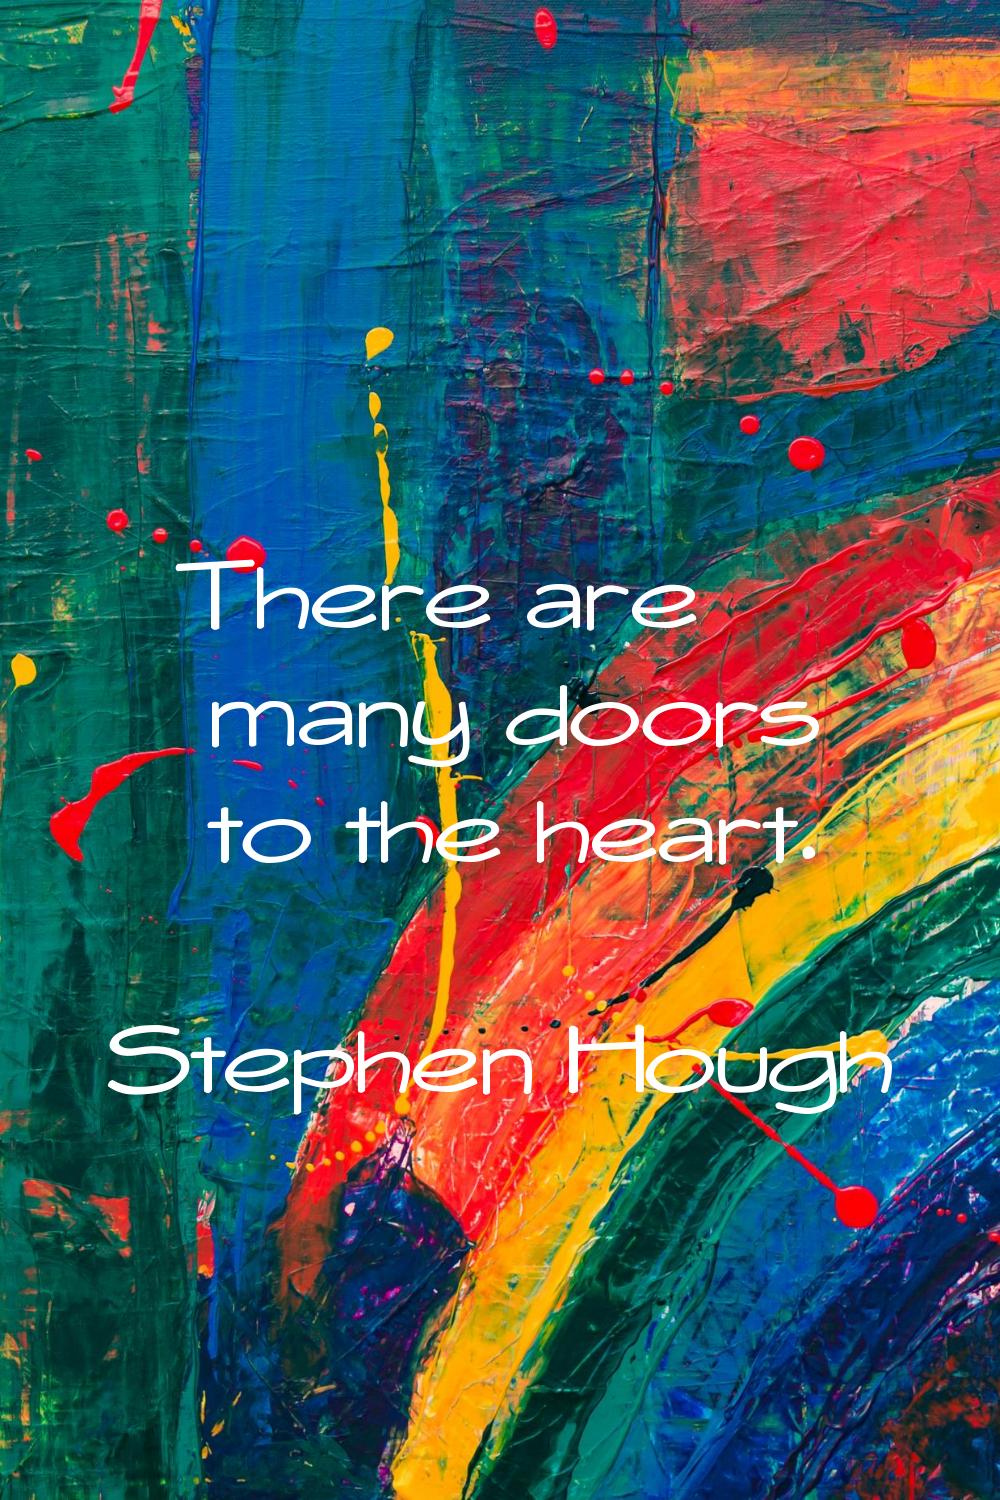 There are many doors to the heart.